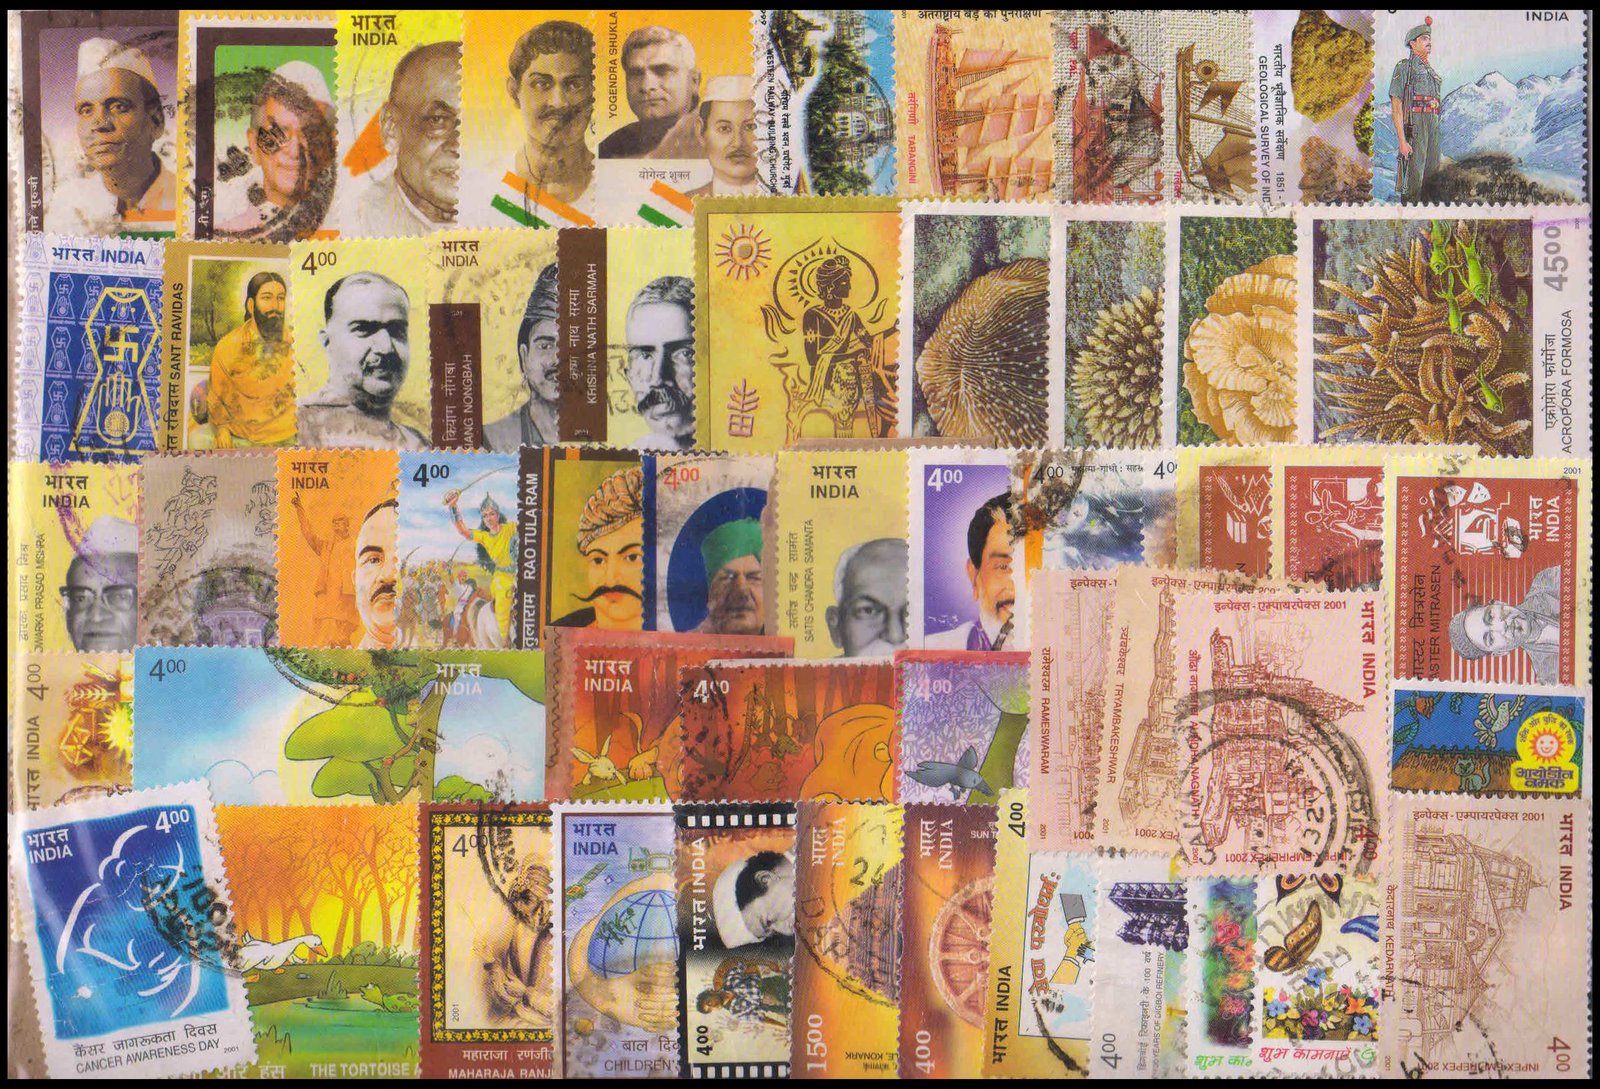 INDIA YEAR UNIT 2001-58 Used Stamps (Total Issued 75 Stamps)